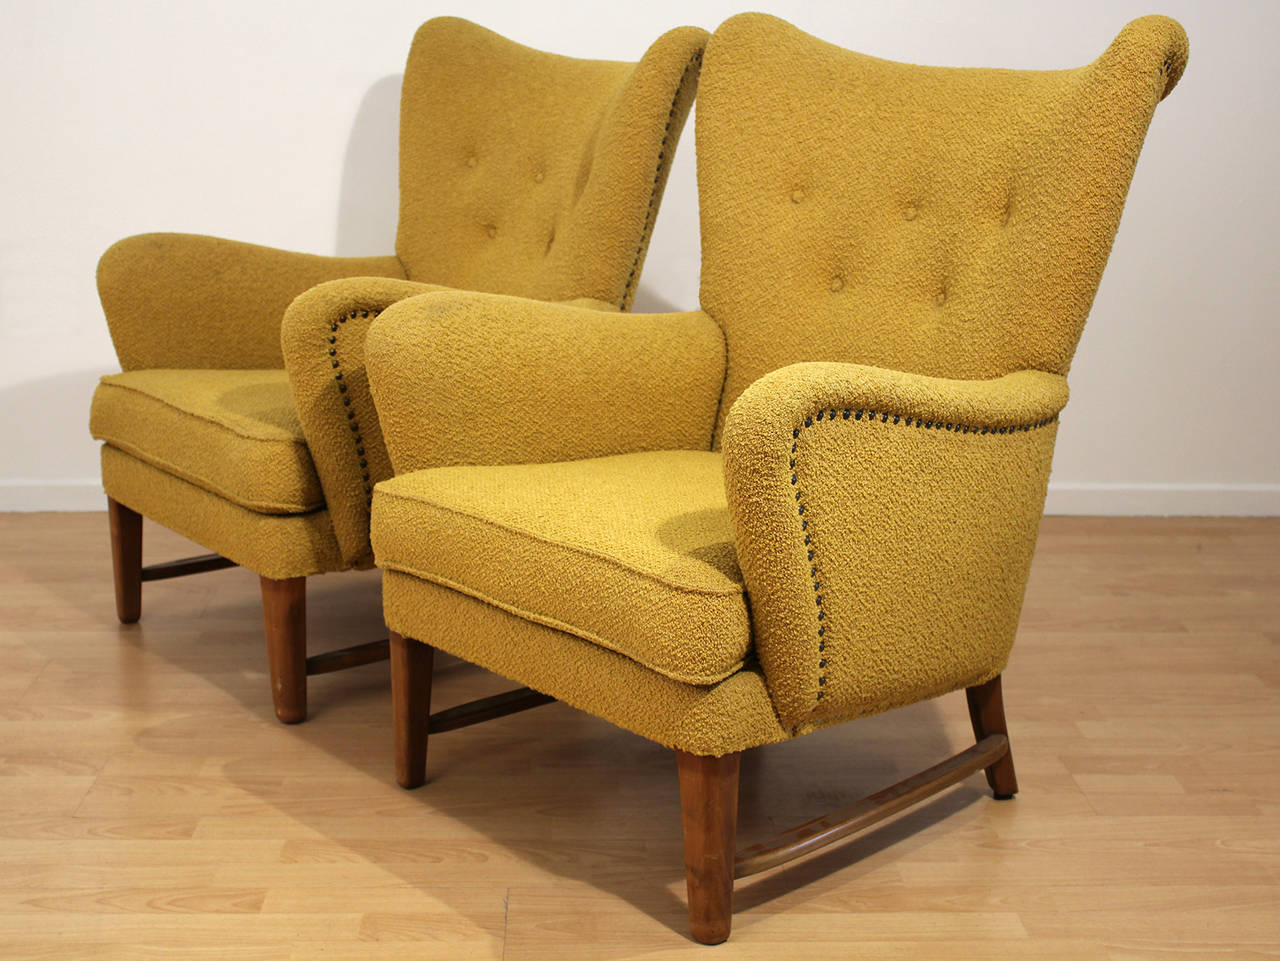 An exceptional pair of early modernist wing back armchairs. Matching sofa also available. This entire set is in amazingly well preserved all-original condition with original finish and nubby mustard upholstery. Minor wear considering the age. Very